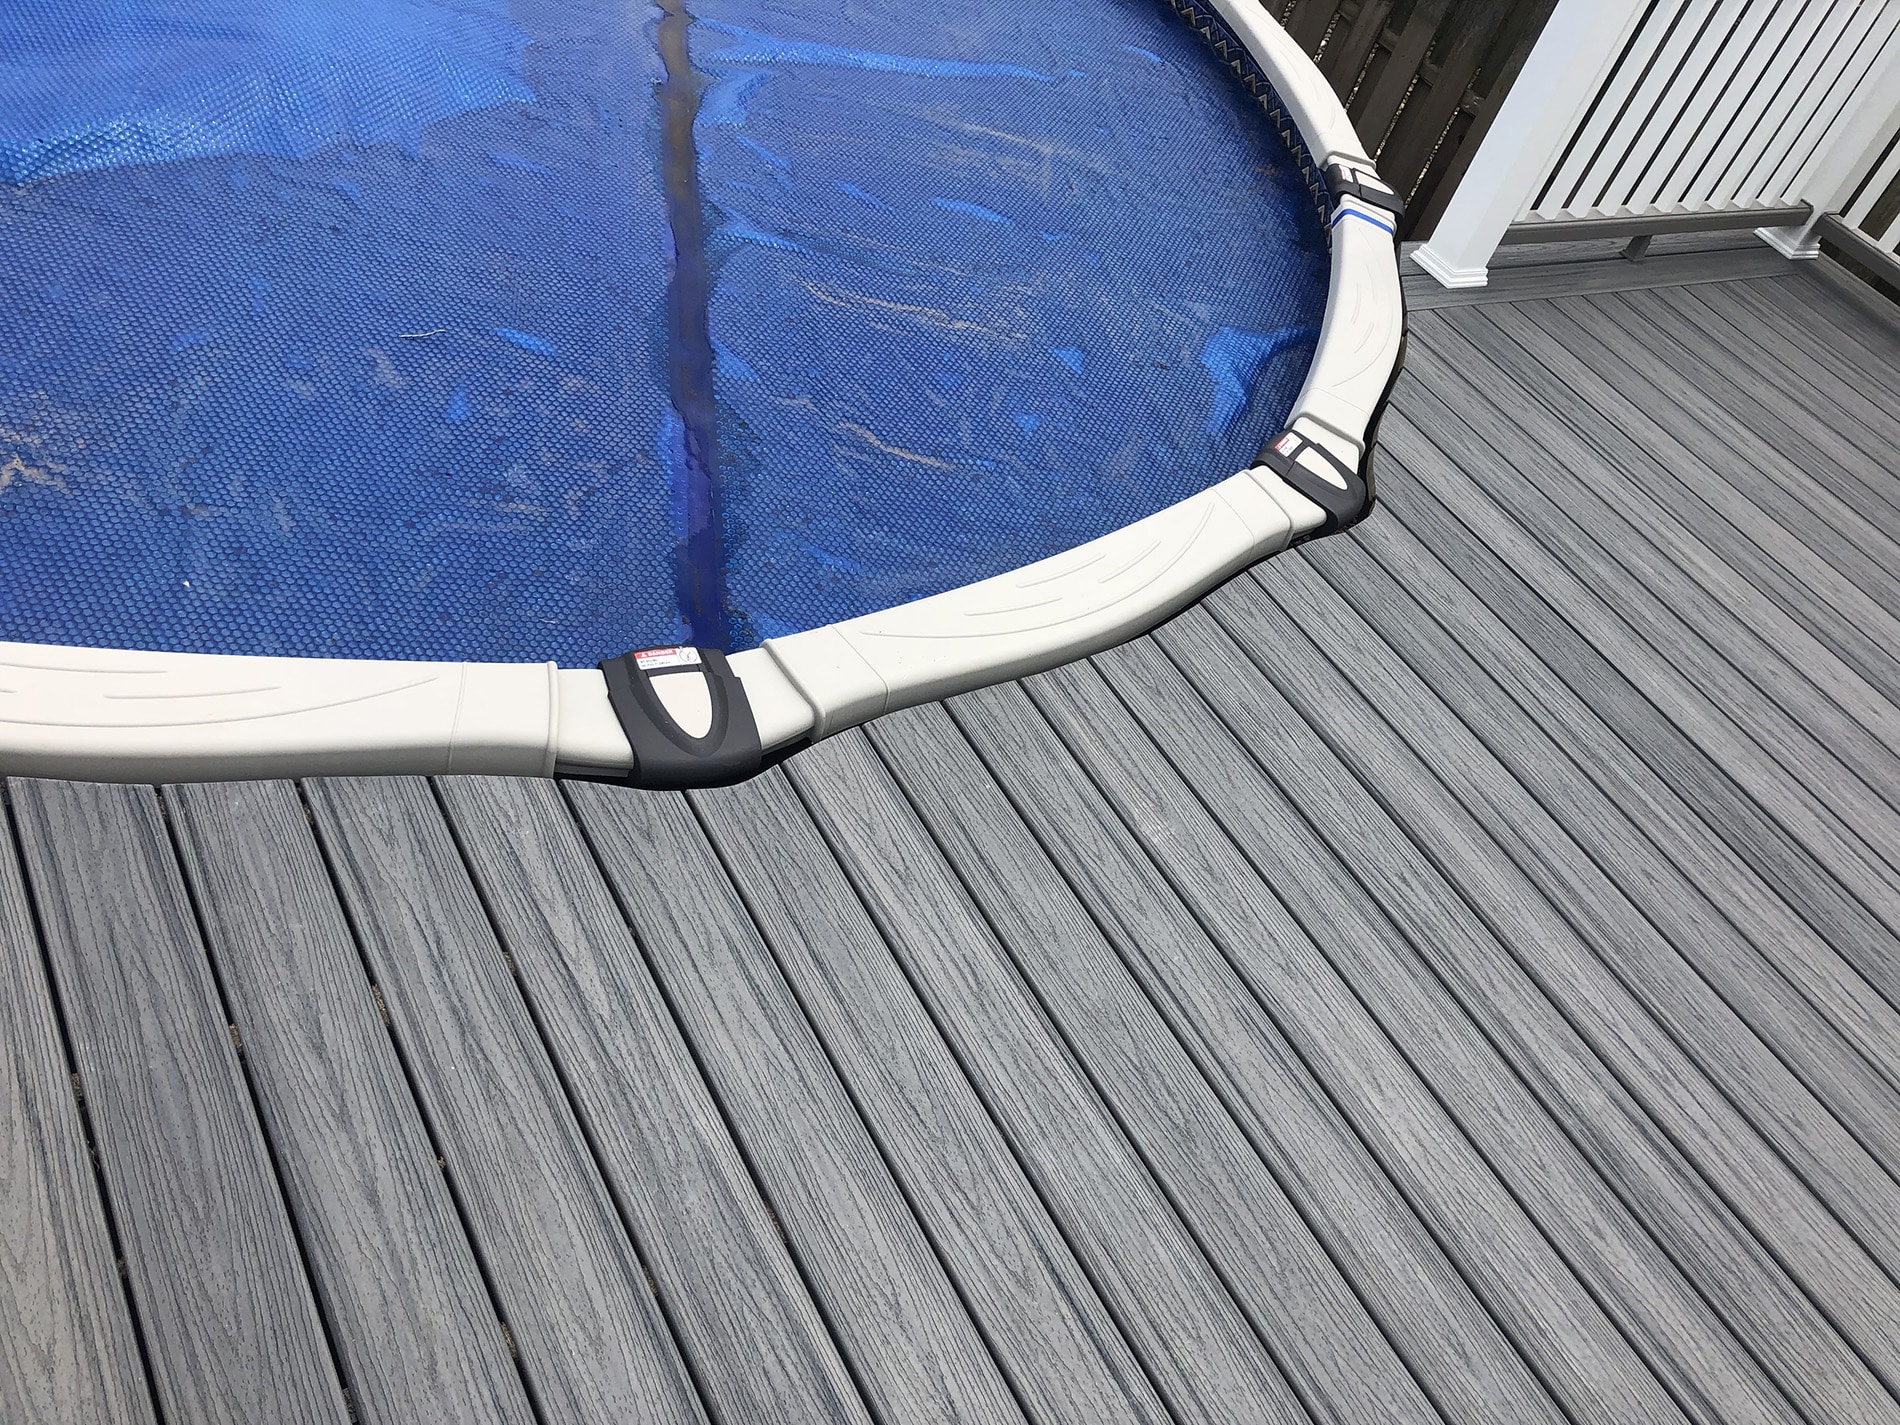 composite deck photo gallery img 3824